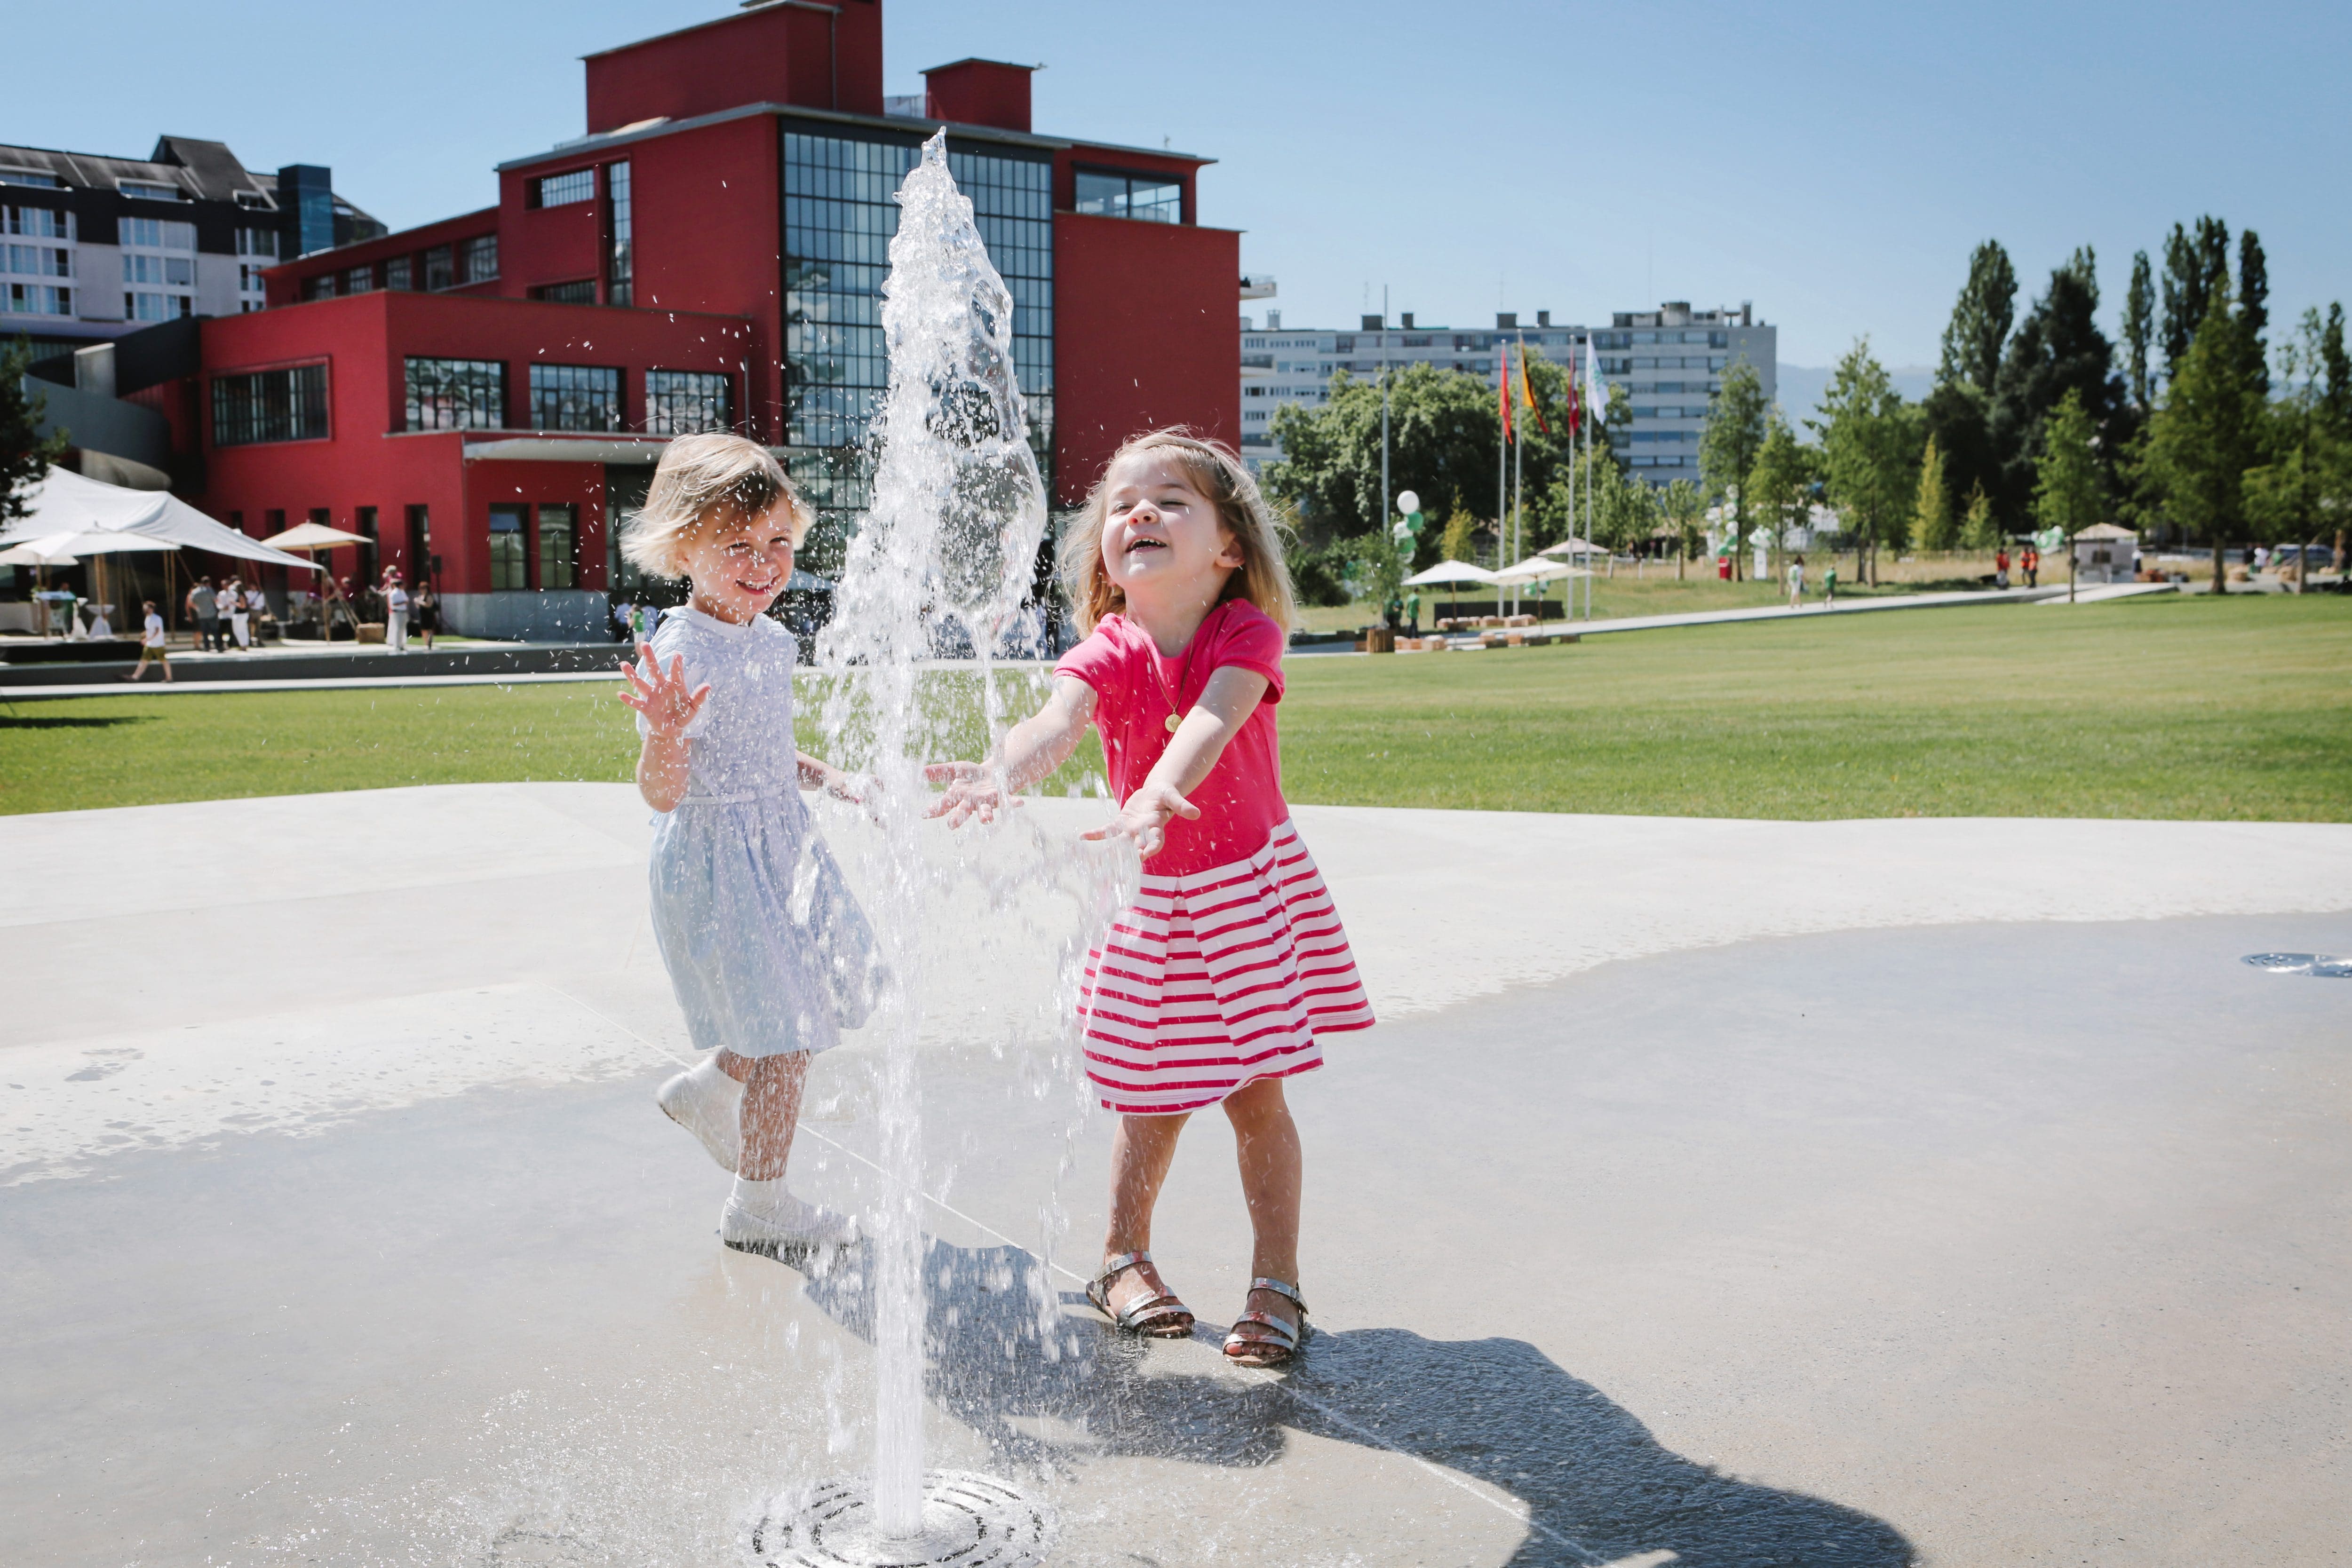 Children playing with a water feature in Geneva